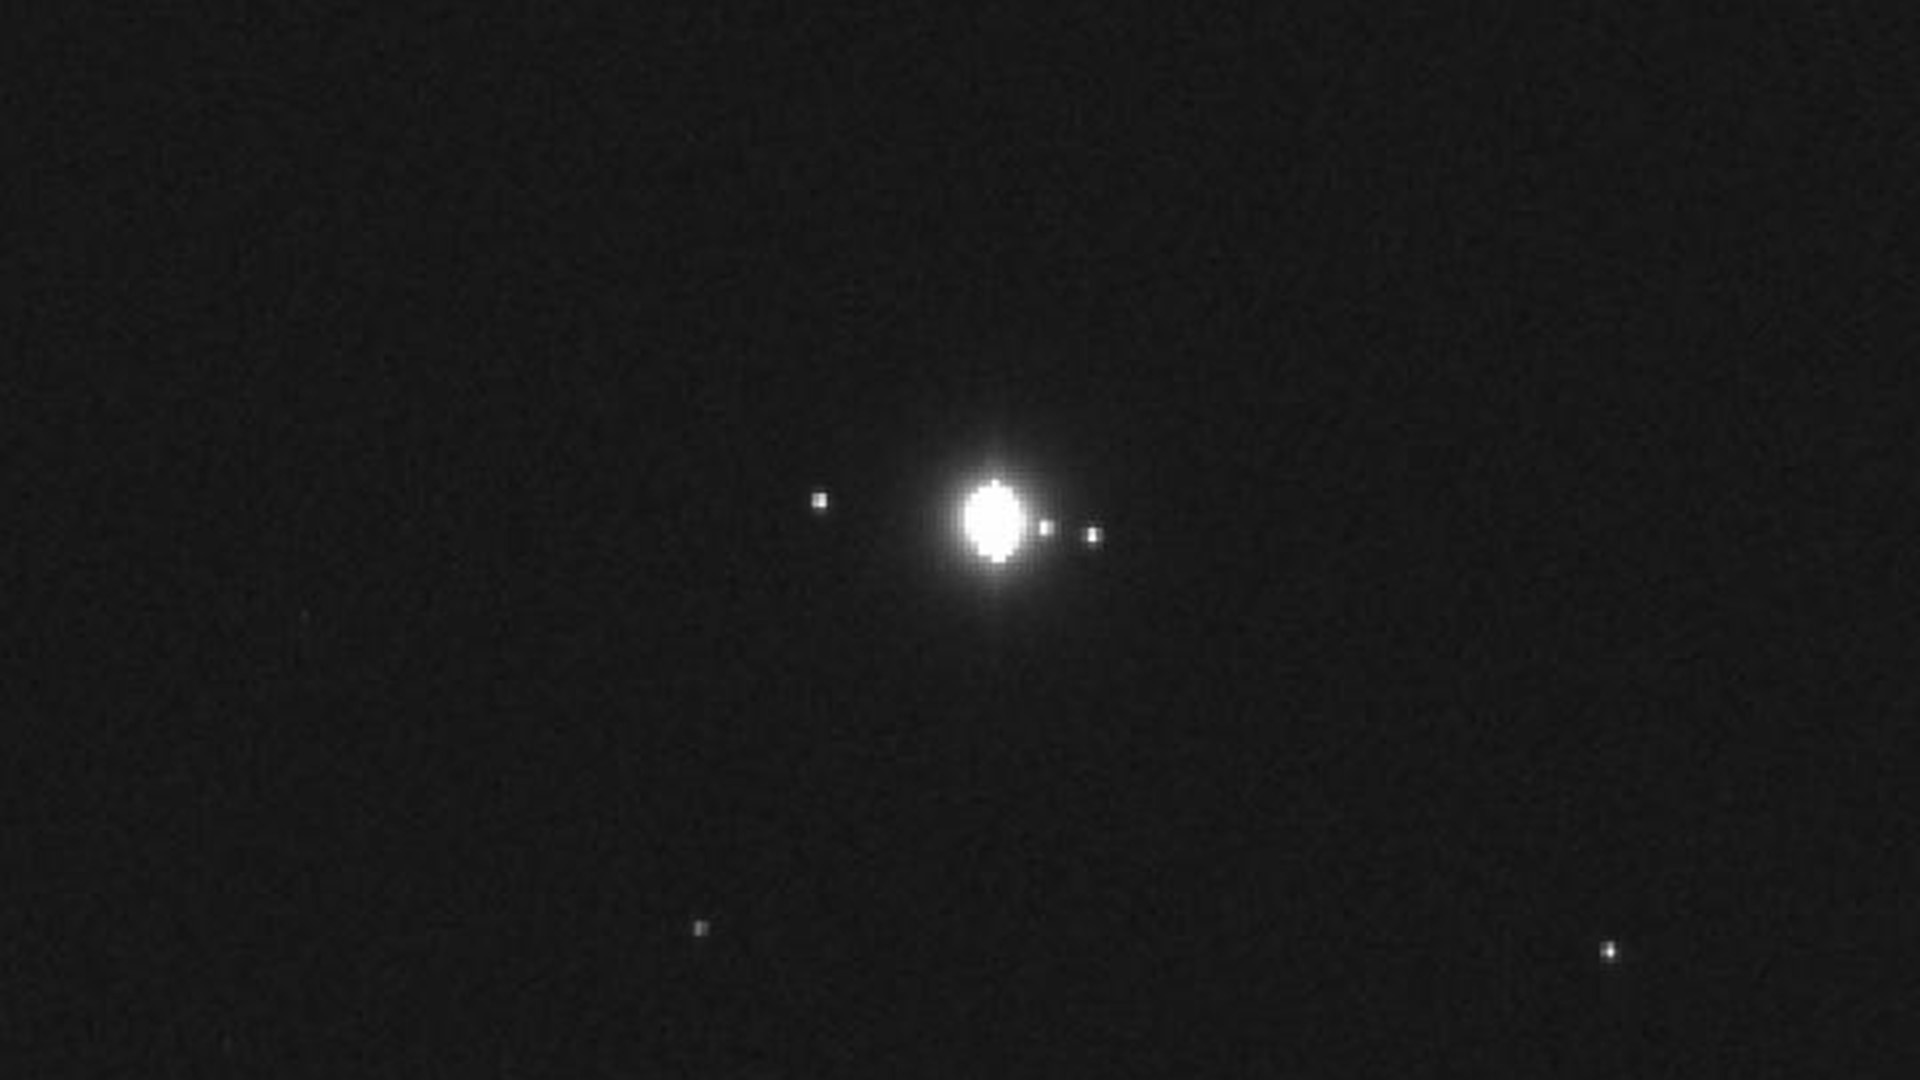 An image of Jupiter taken by OSIRIS-REx, 75 million miles from Earth and 419 million miles from Jupiter. With an exposure time of two seconds, the image renders Jupiter overexposed, but allows for enhanced detection of stars in the background.